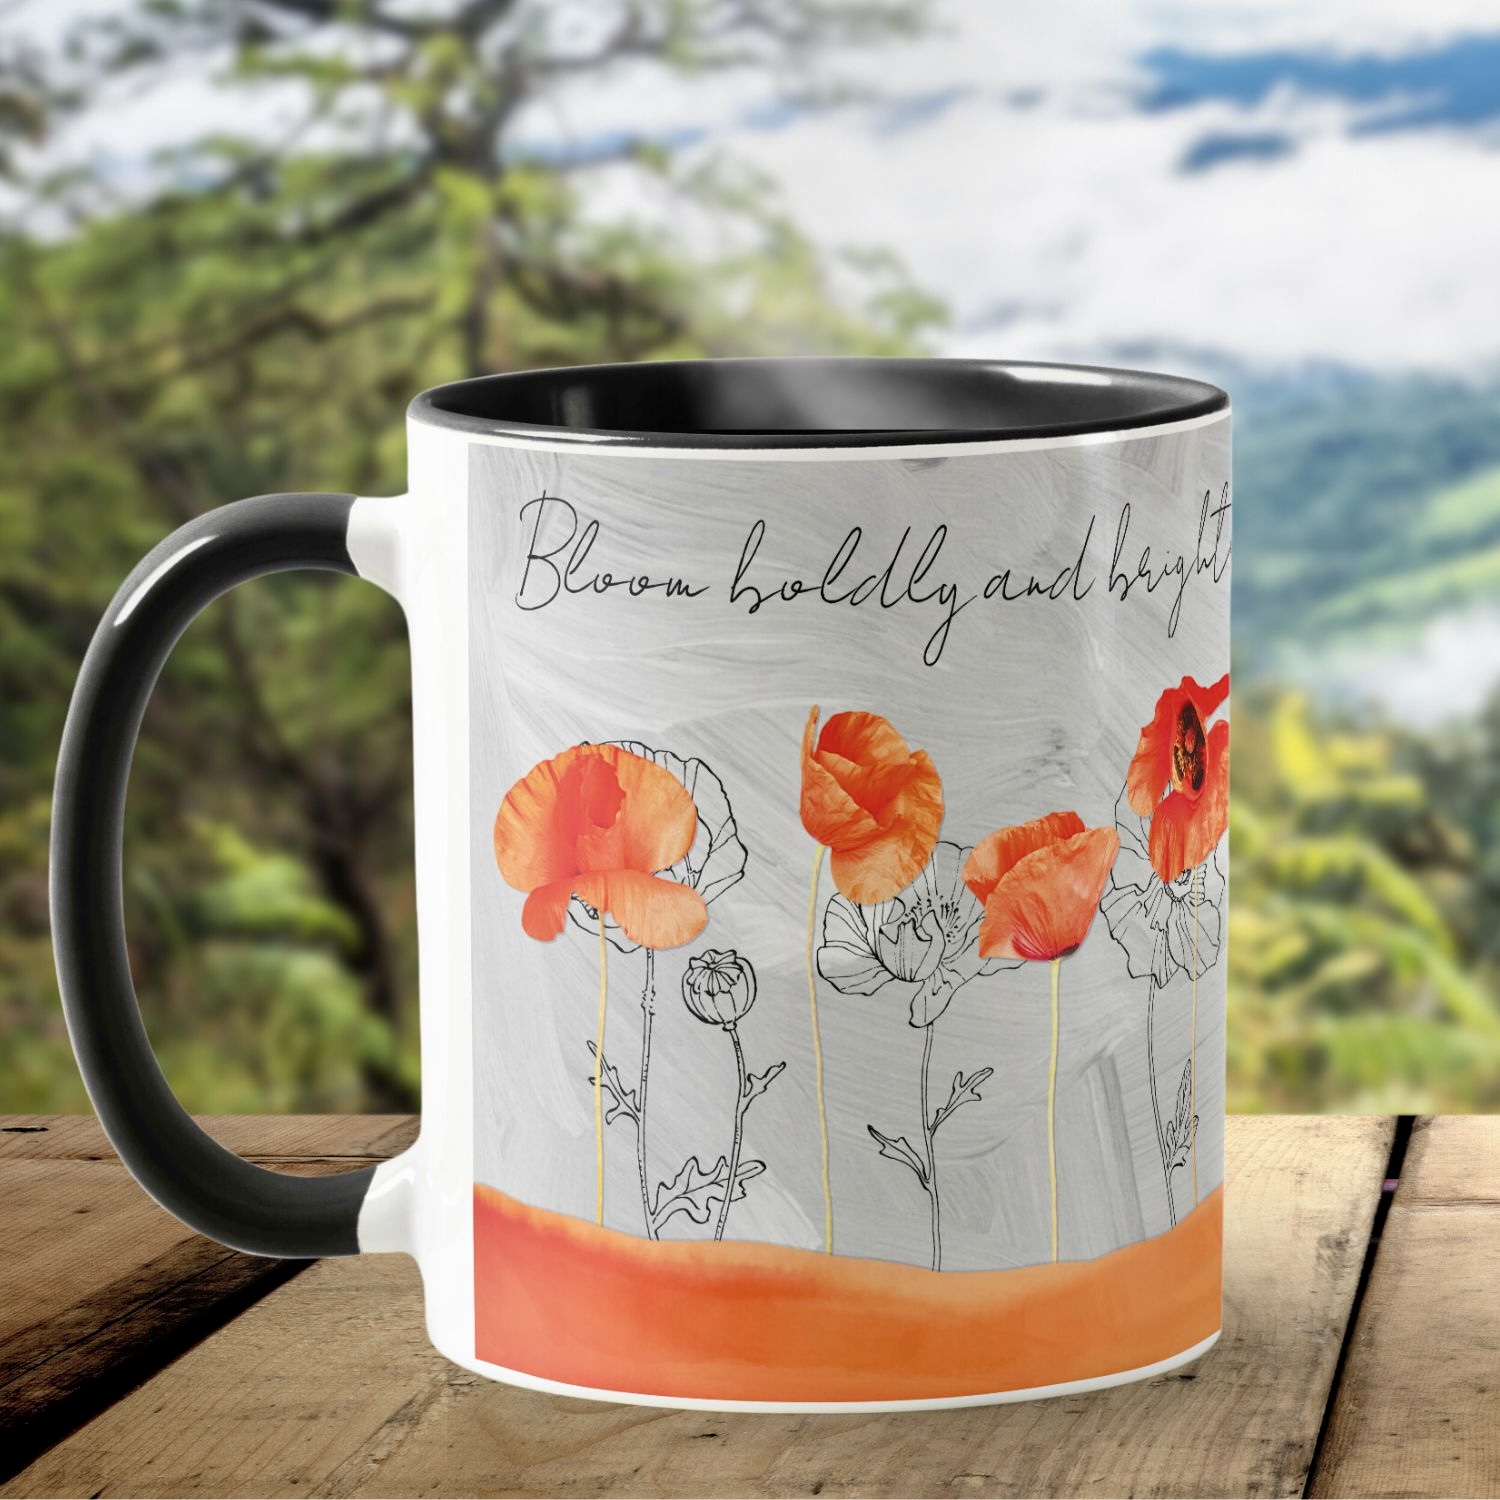 A bohemian eclectic mug adorned with poppy flowers, customizable with a name and special message.